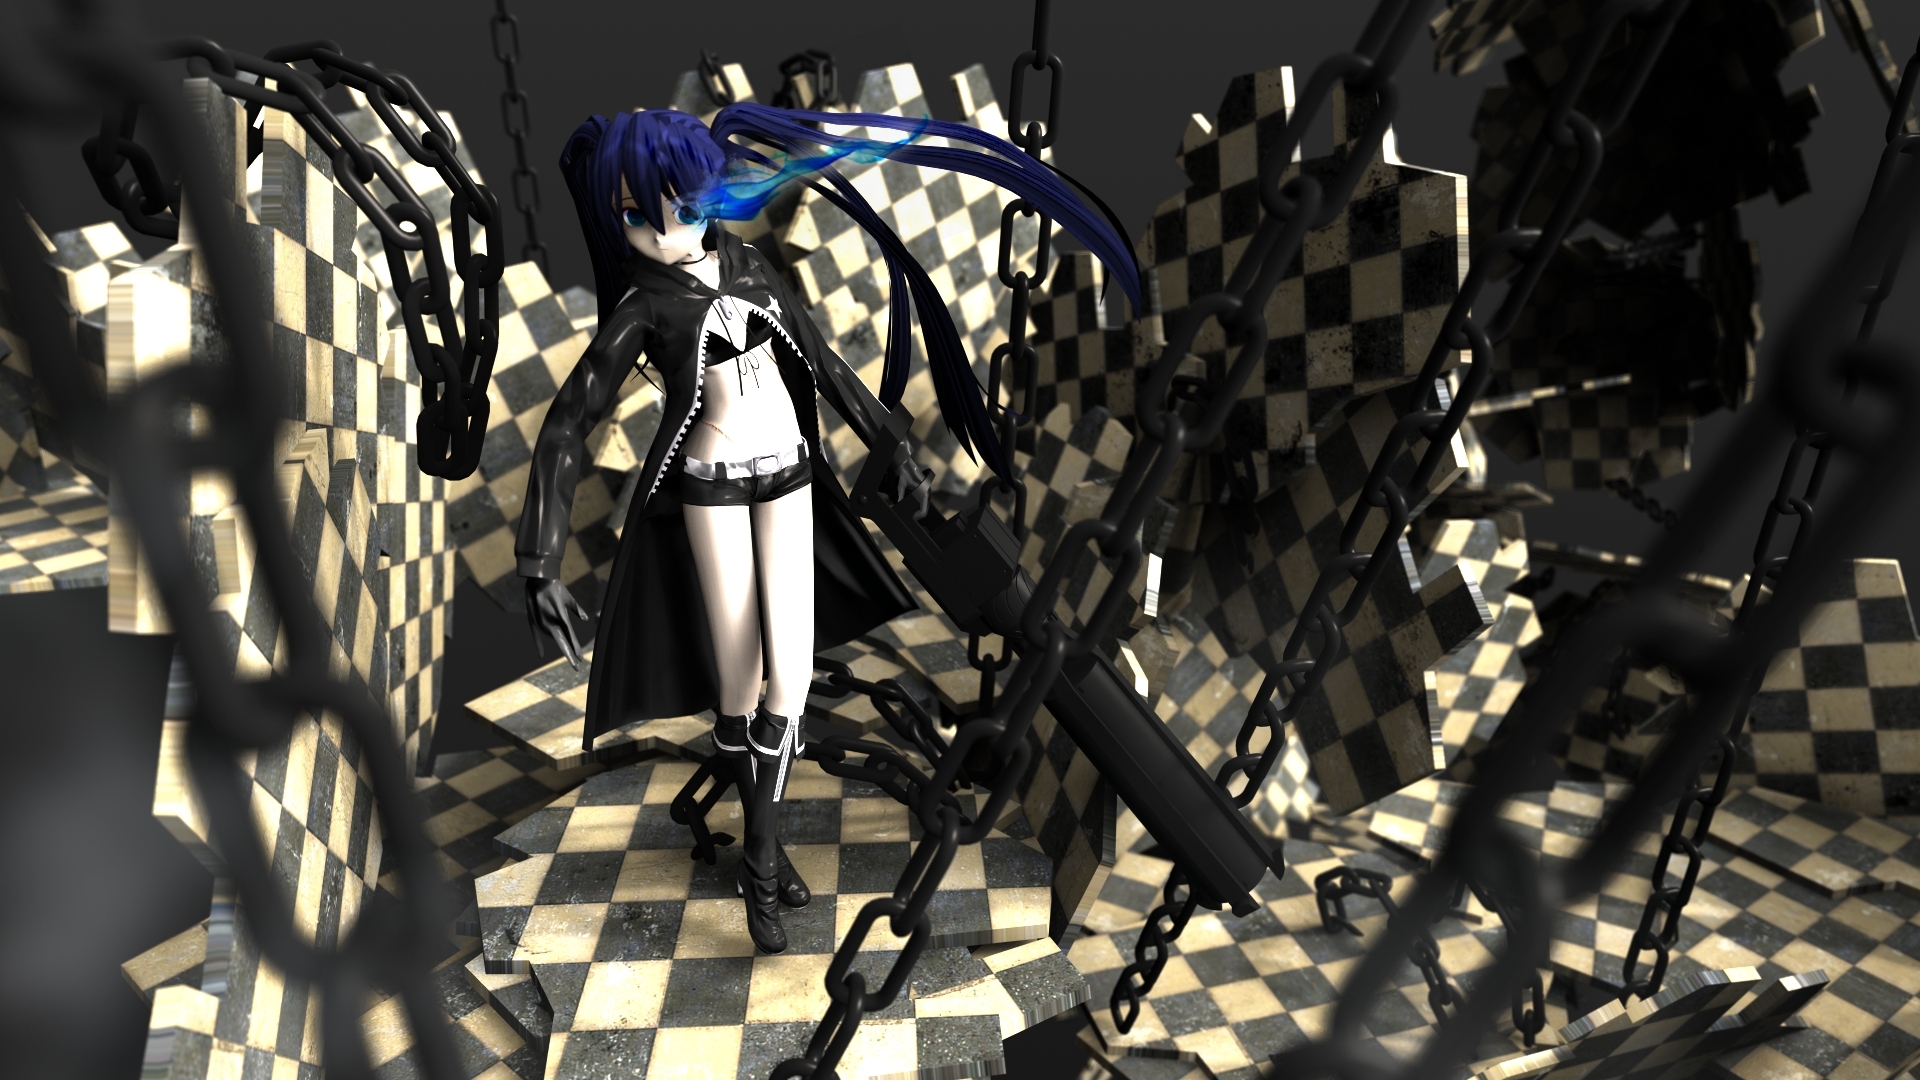 Black Rock Shooter Theme for WIN XP addon - Anime Fans of modDB